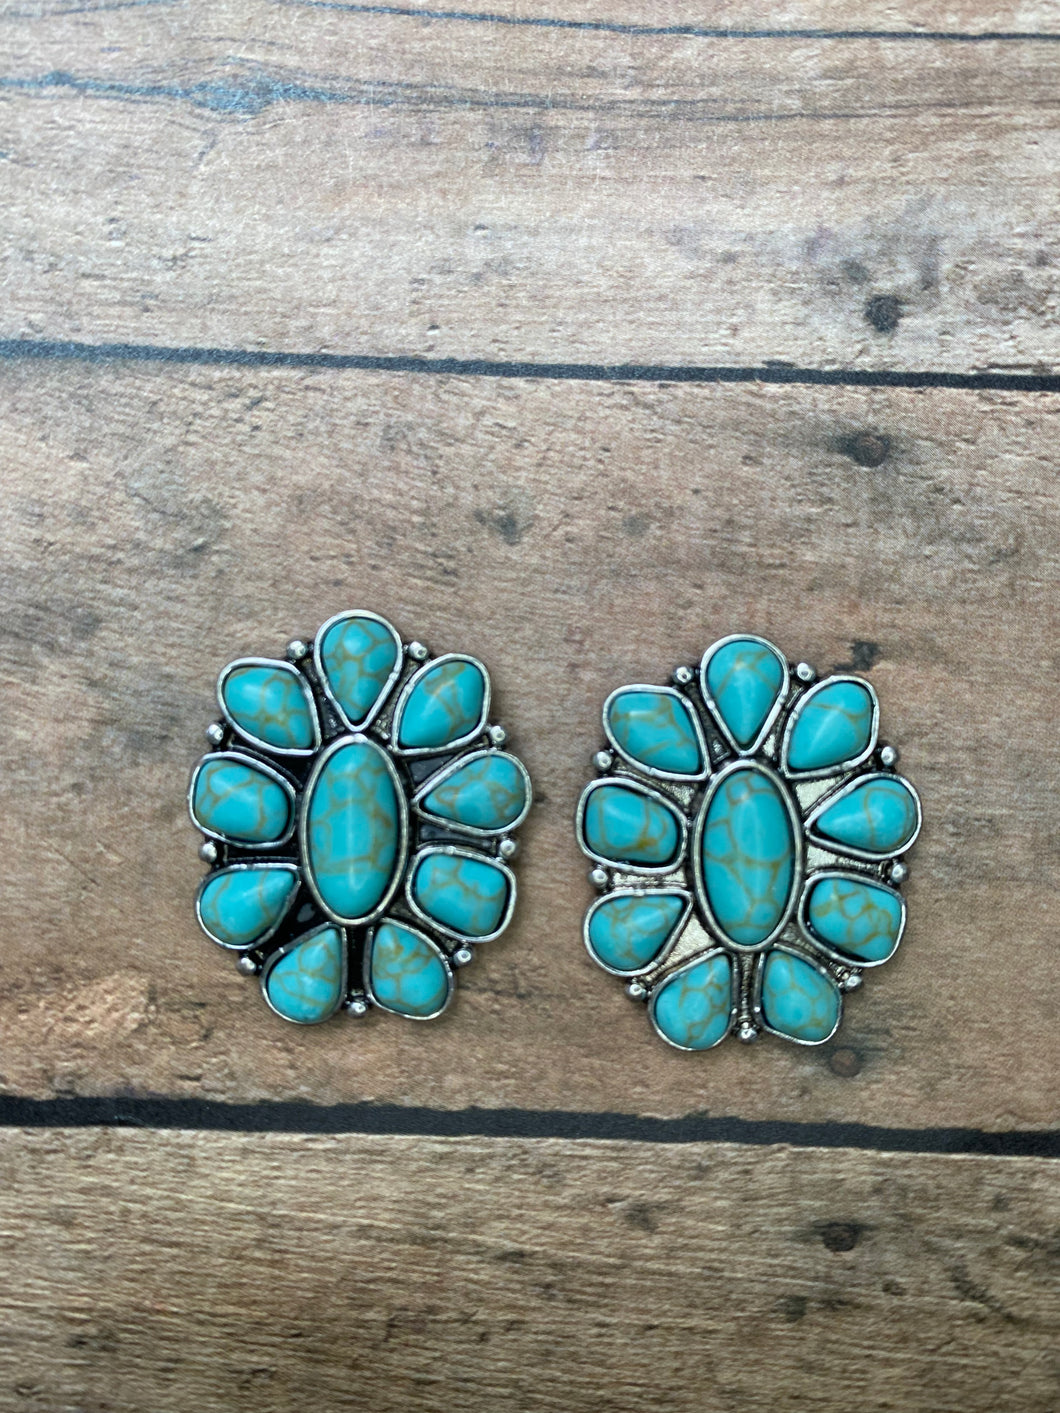 Classic turquoise cluster studs